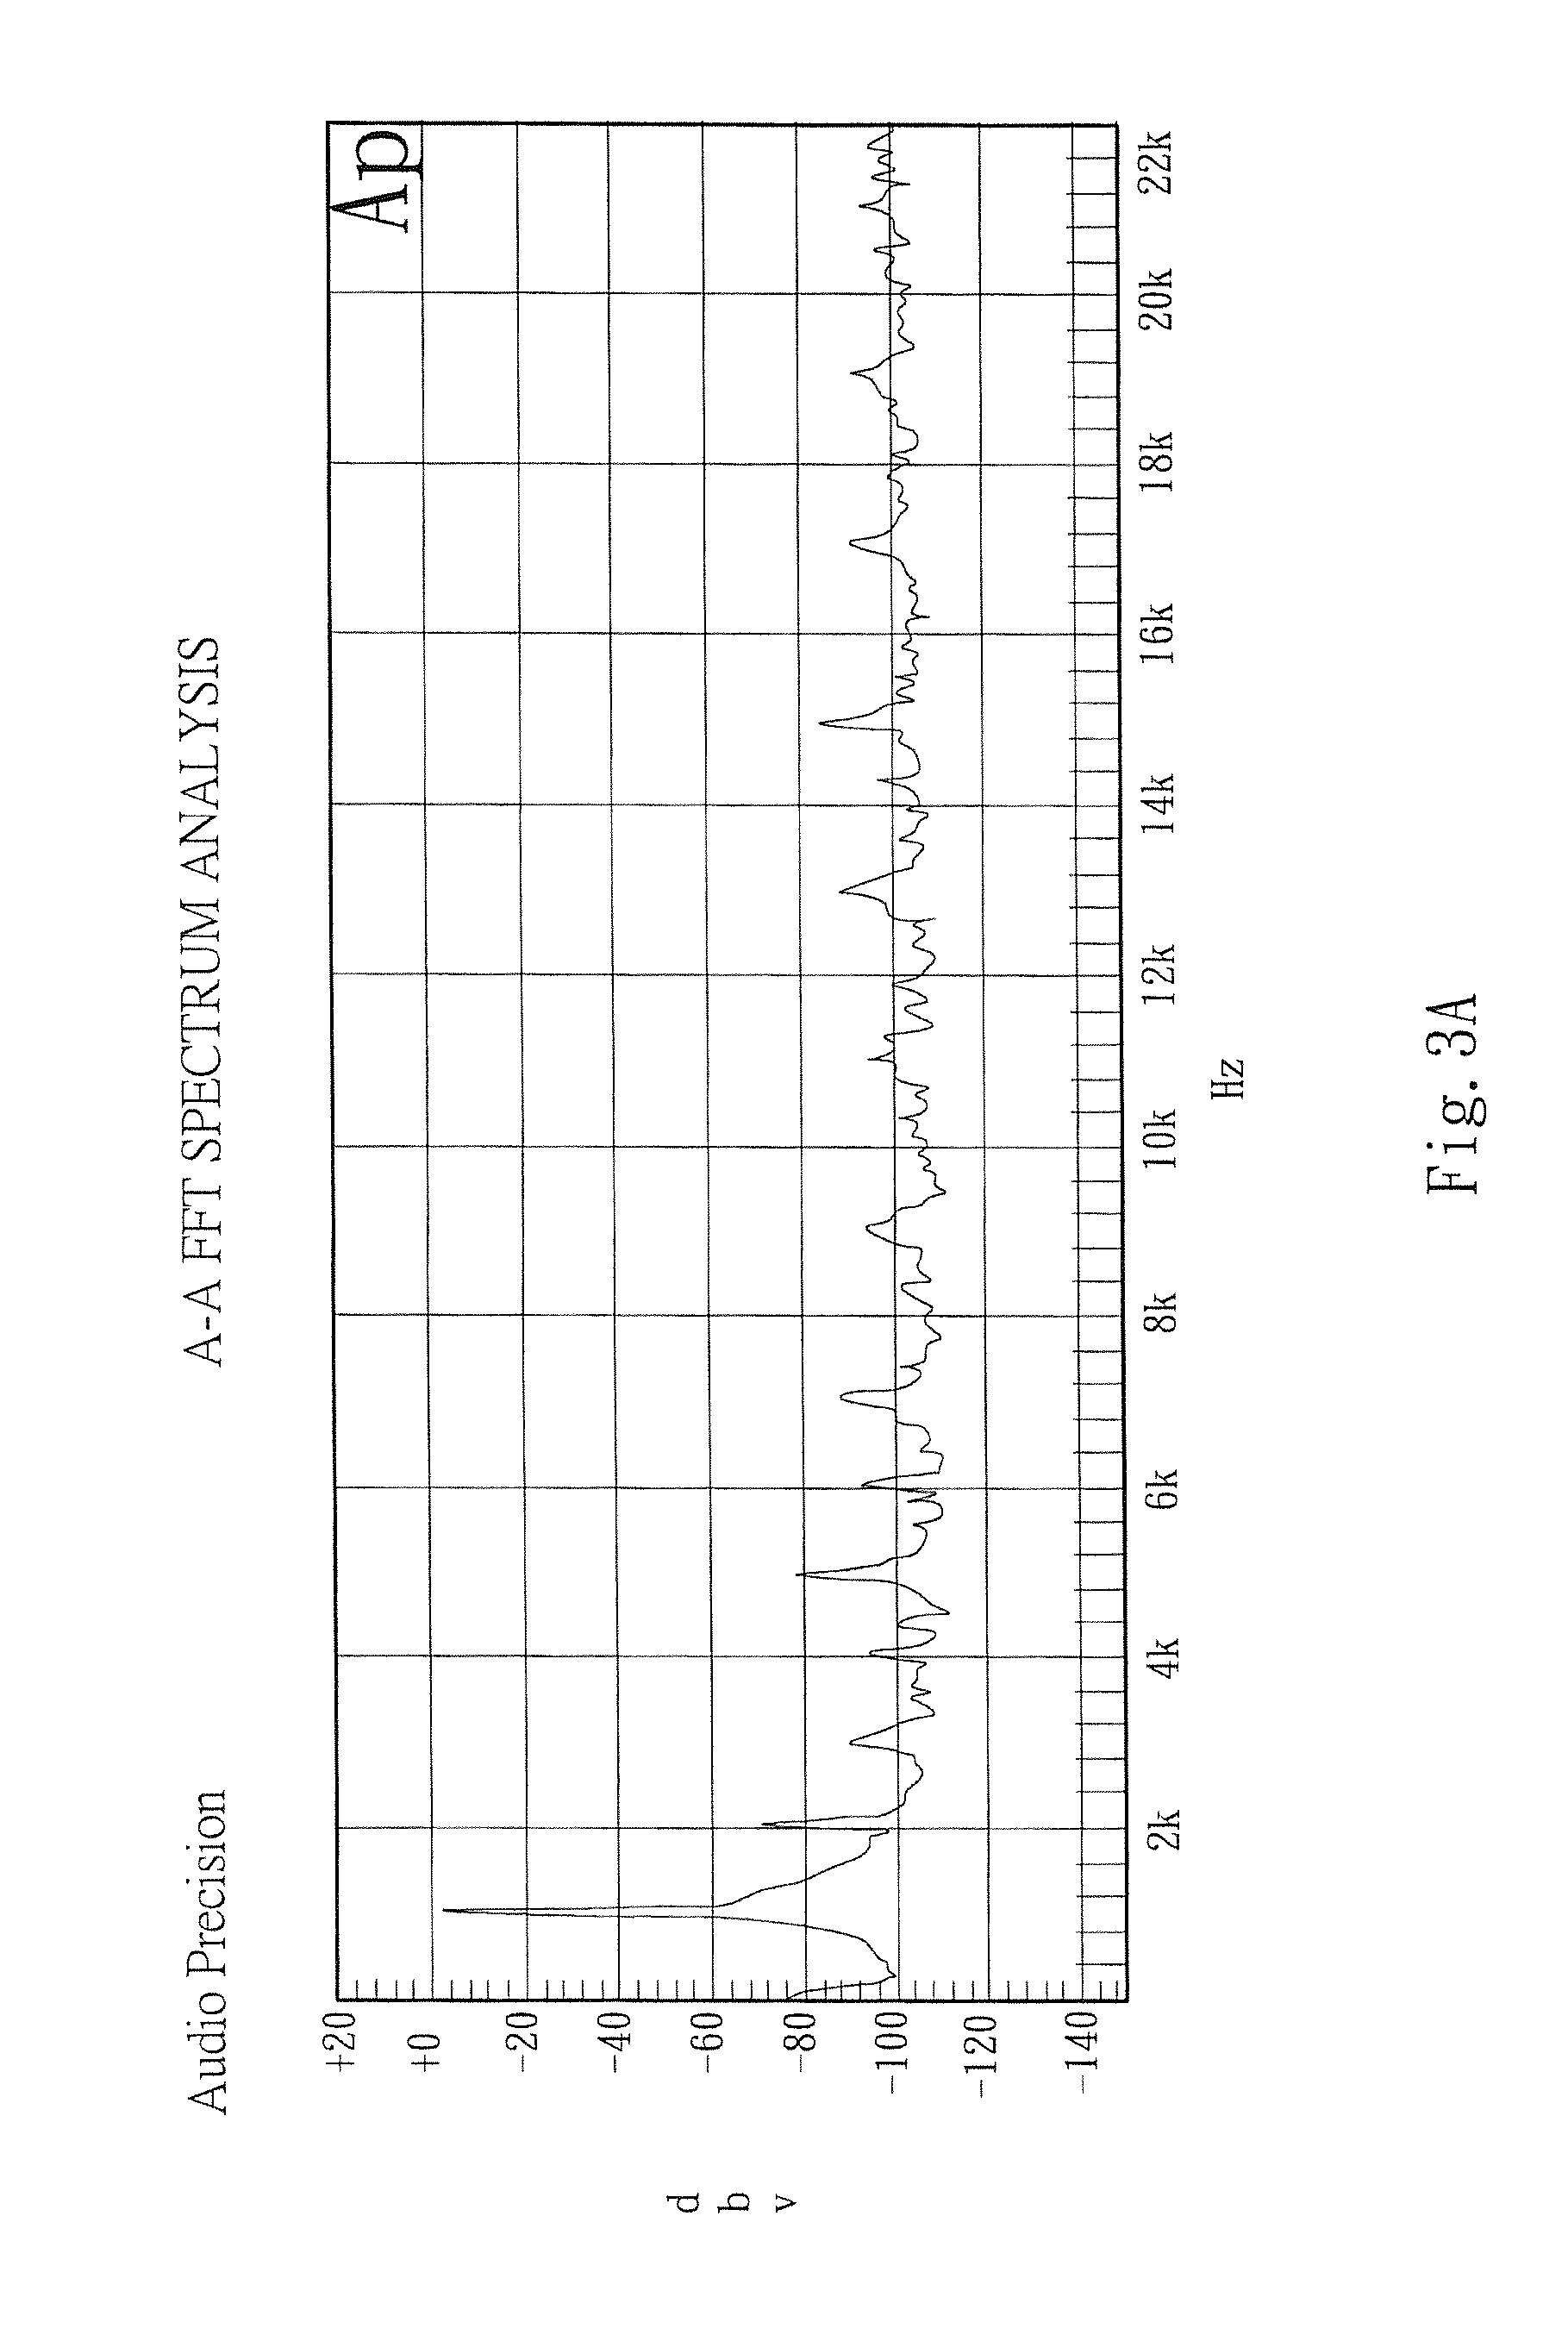 Structure and a method for suppressing audio noise of electronic equipment